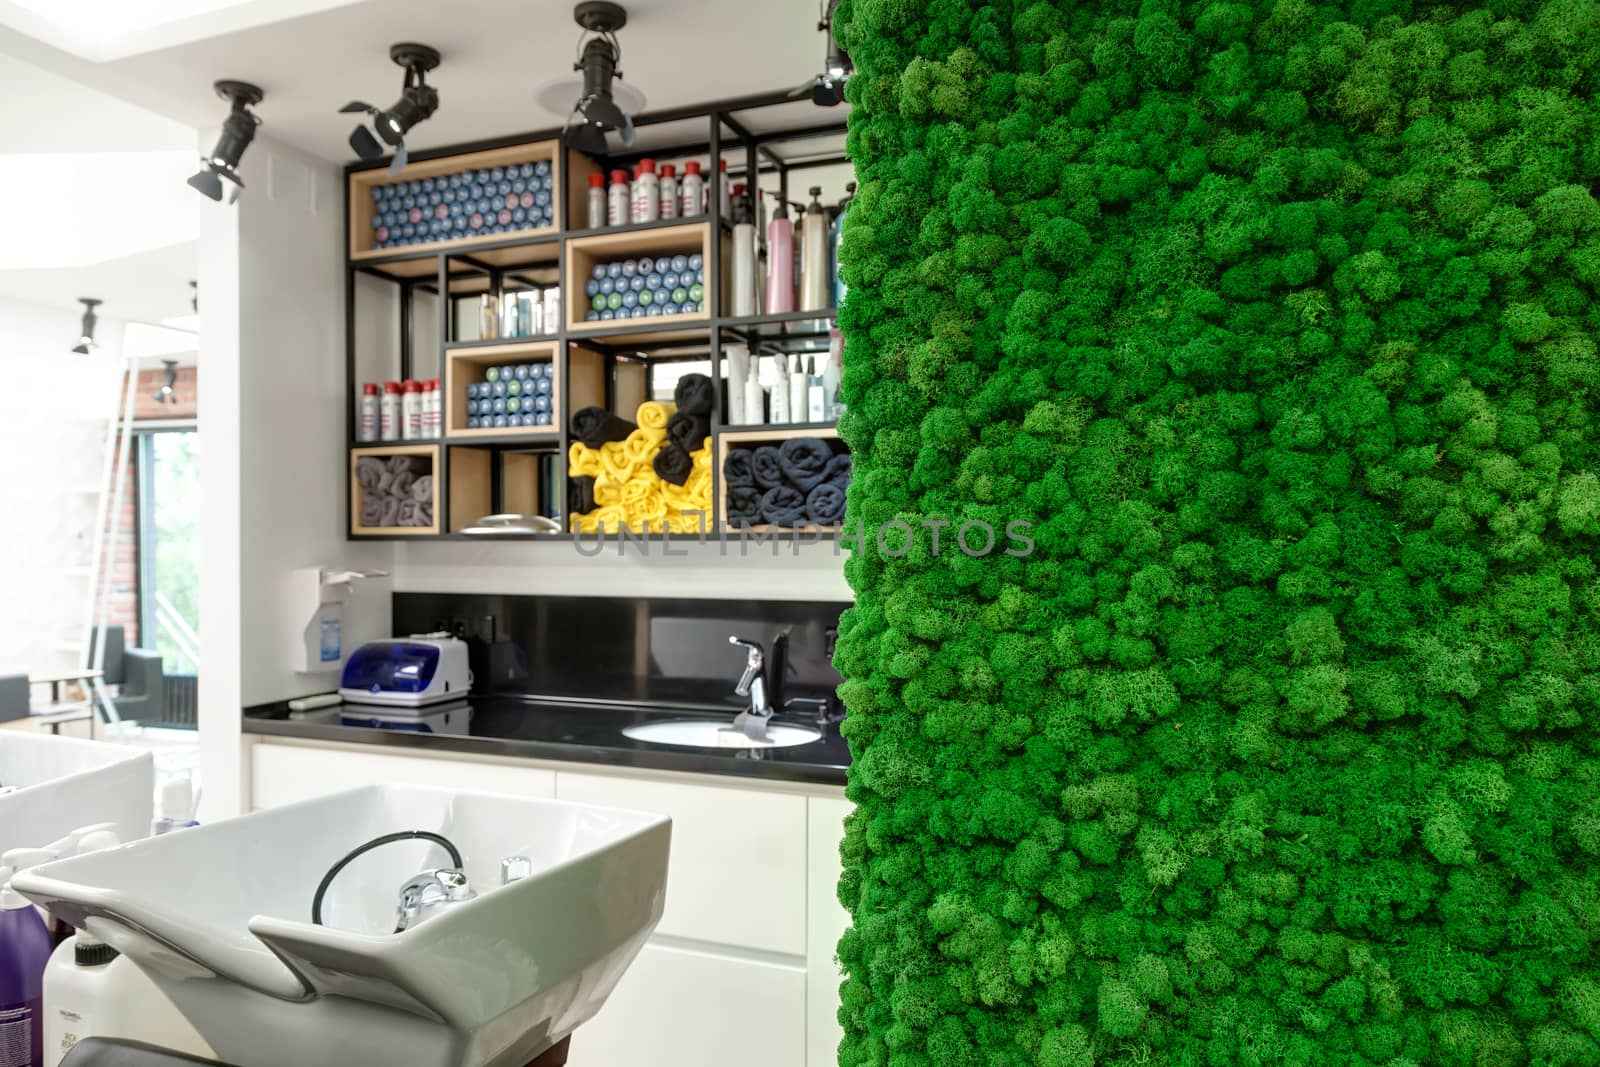 Wall in a beauty salon decorated with decorative green moss